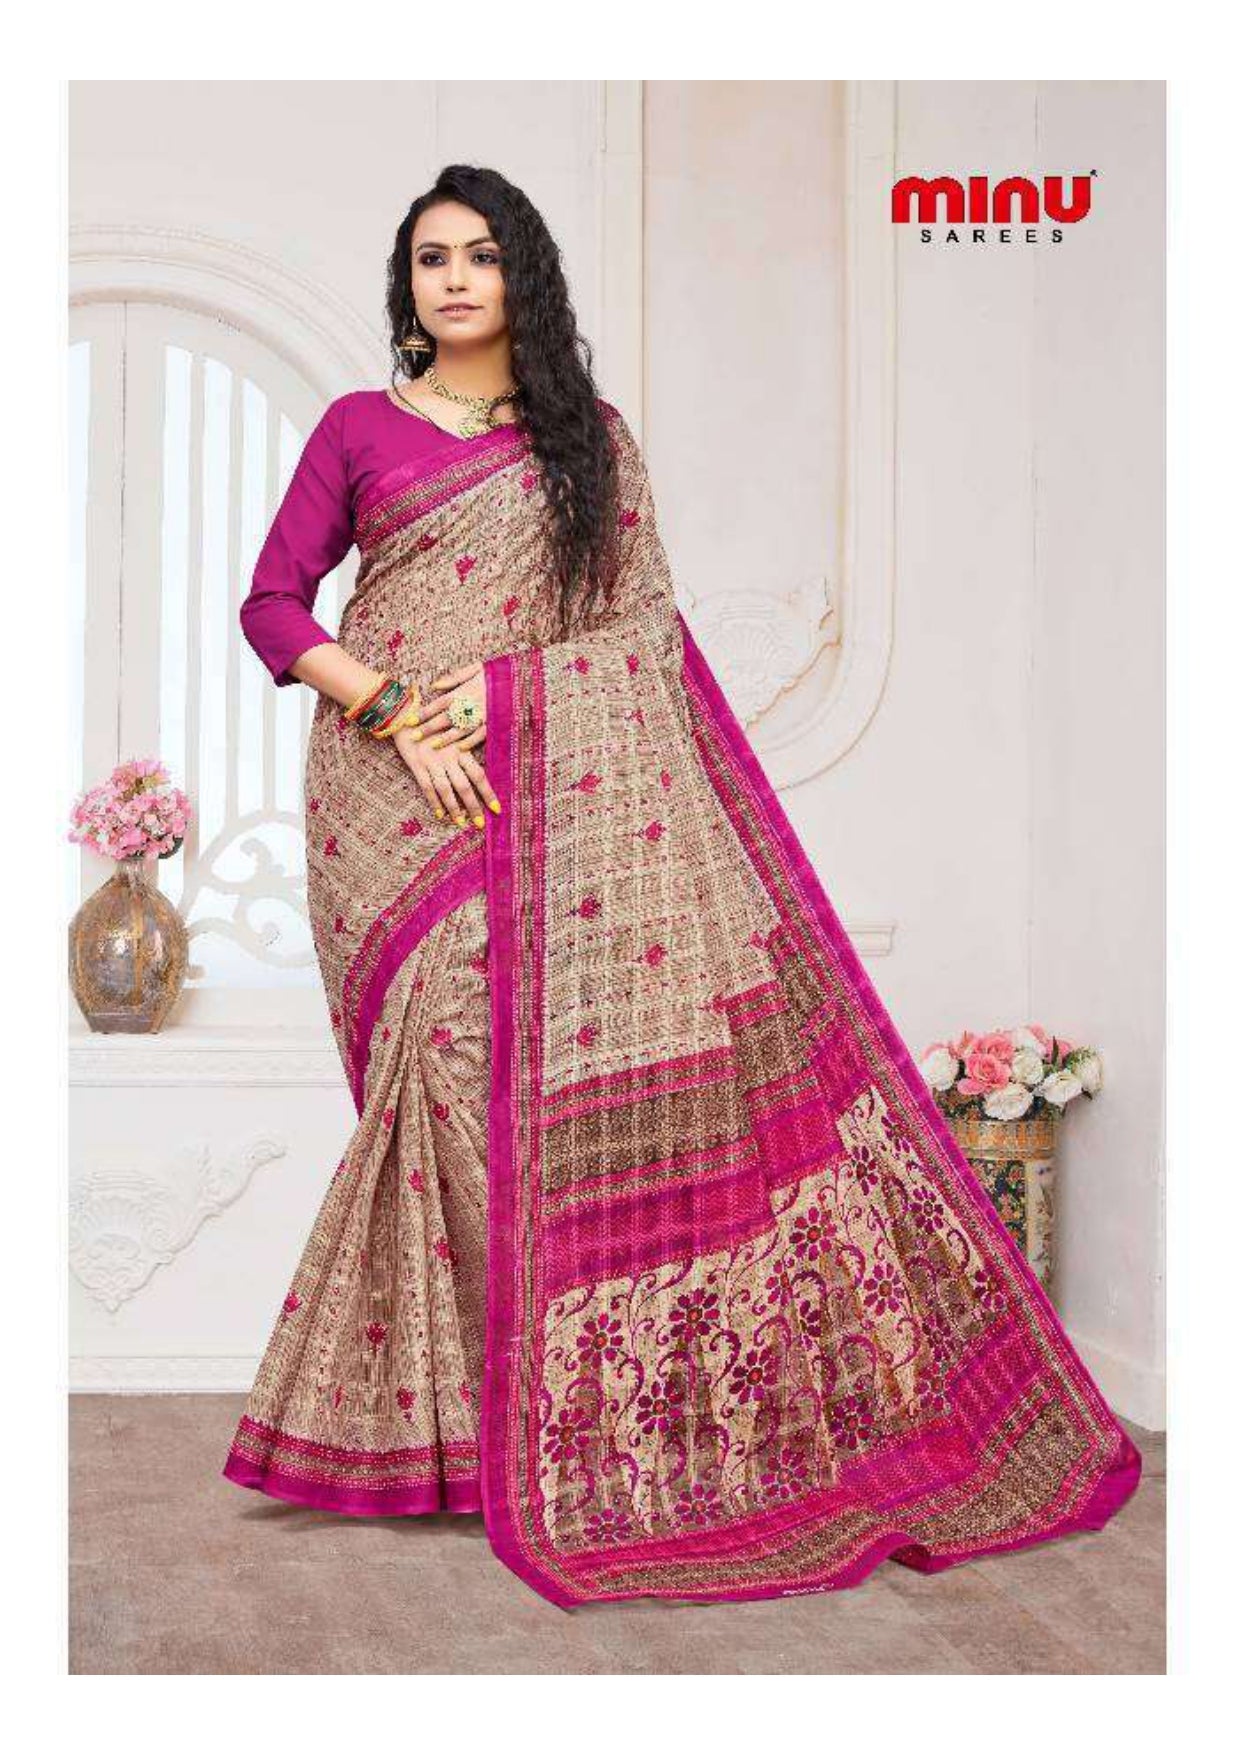 Top-quality best printed saree wearing woman image